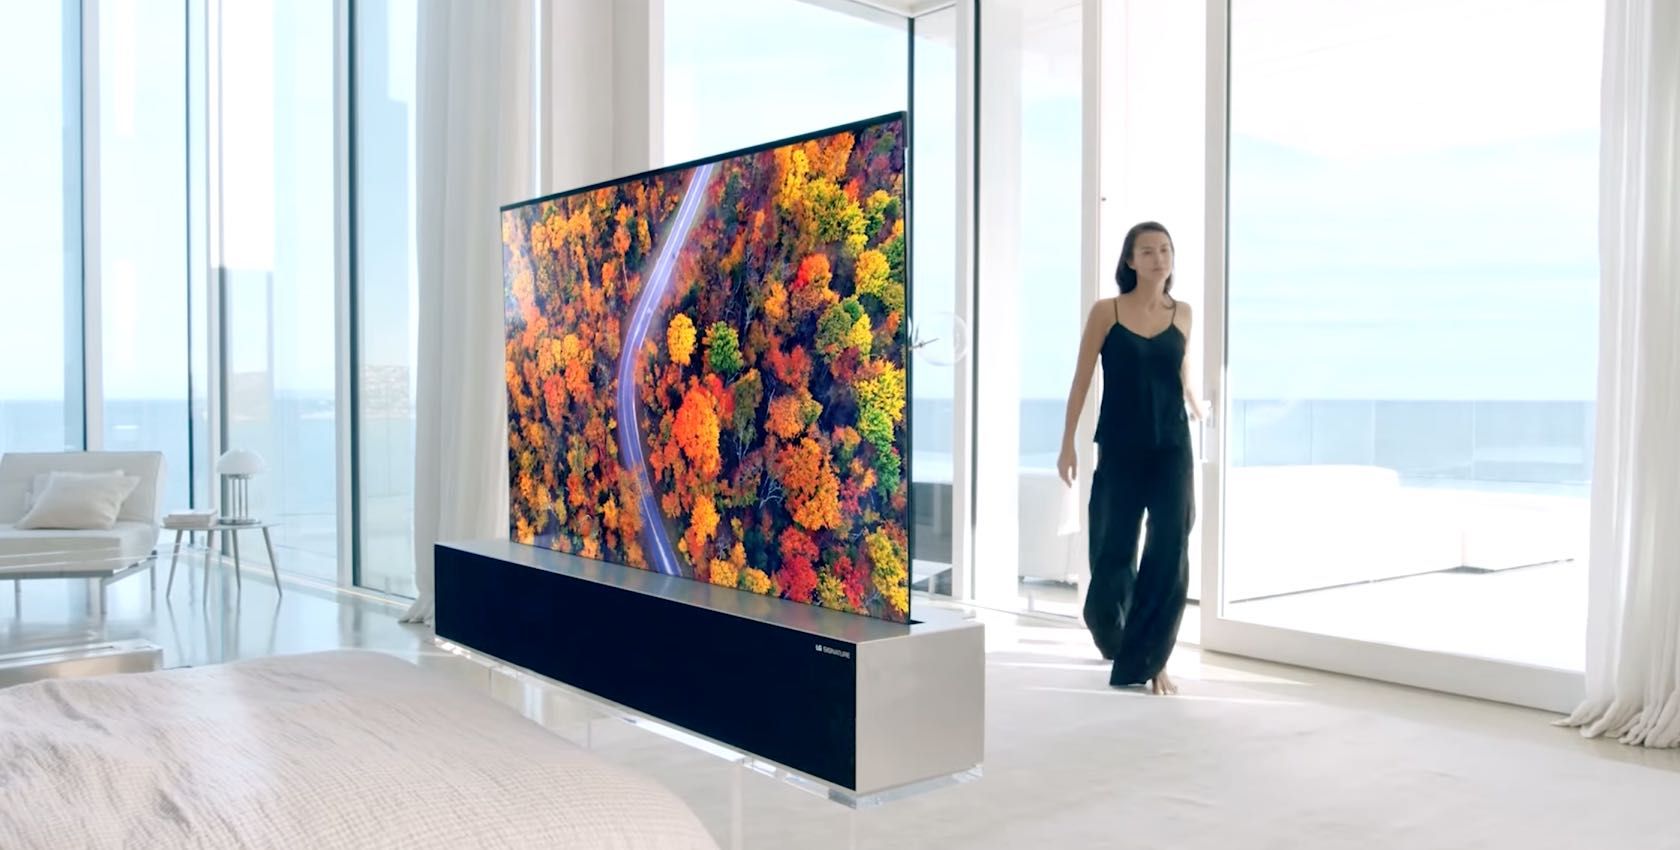 A still from an LG ad for its Signature rollable OLED TV showing a young woman in a luxury home with the rollable TV installed